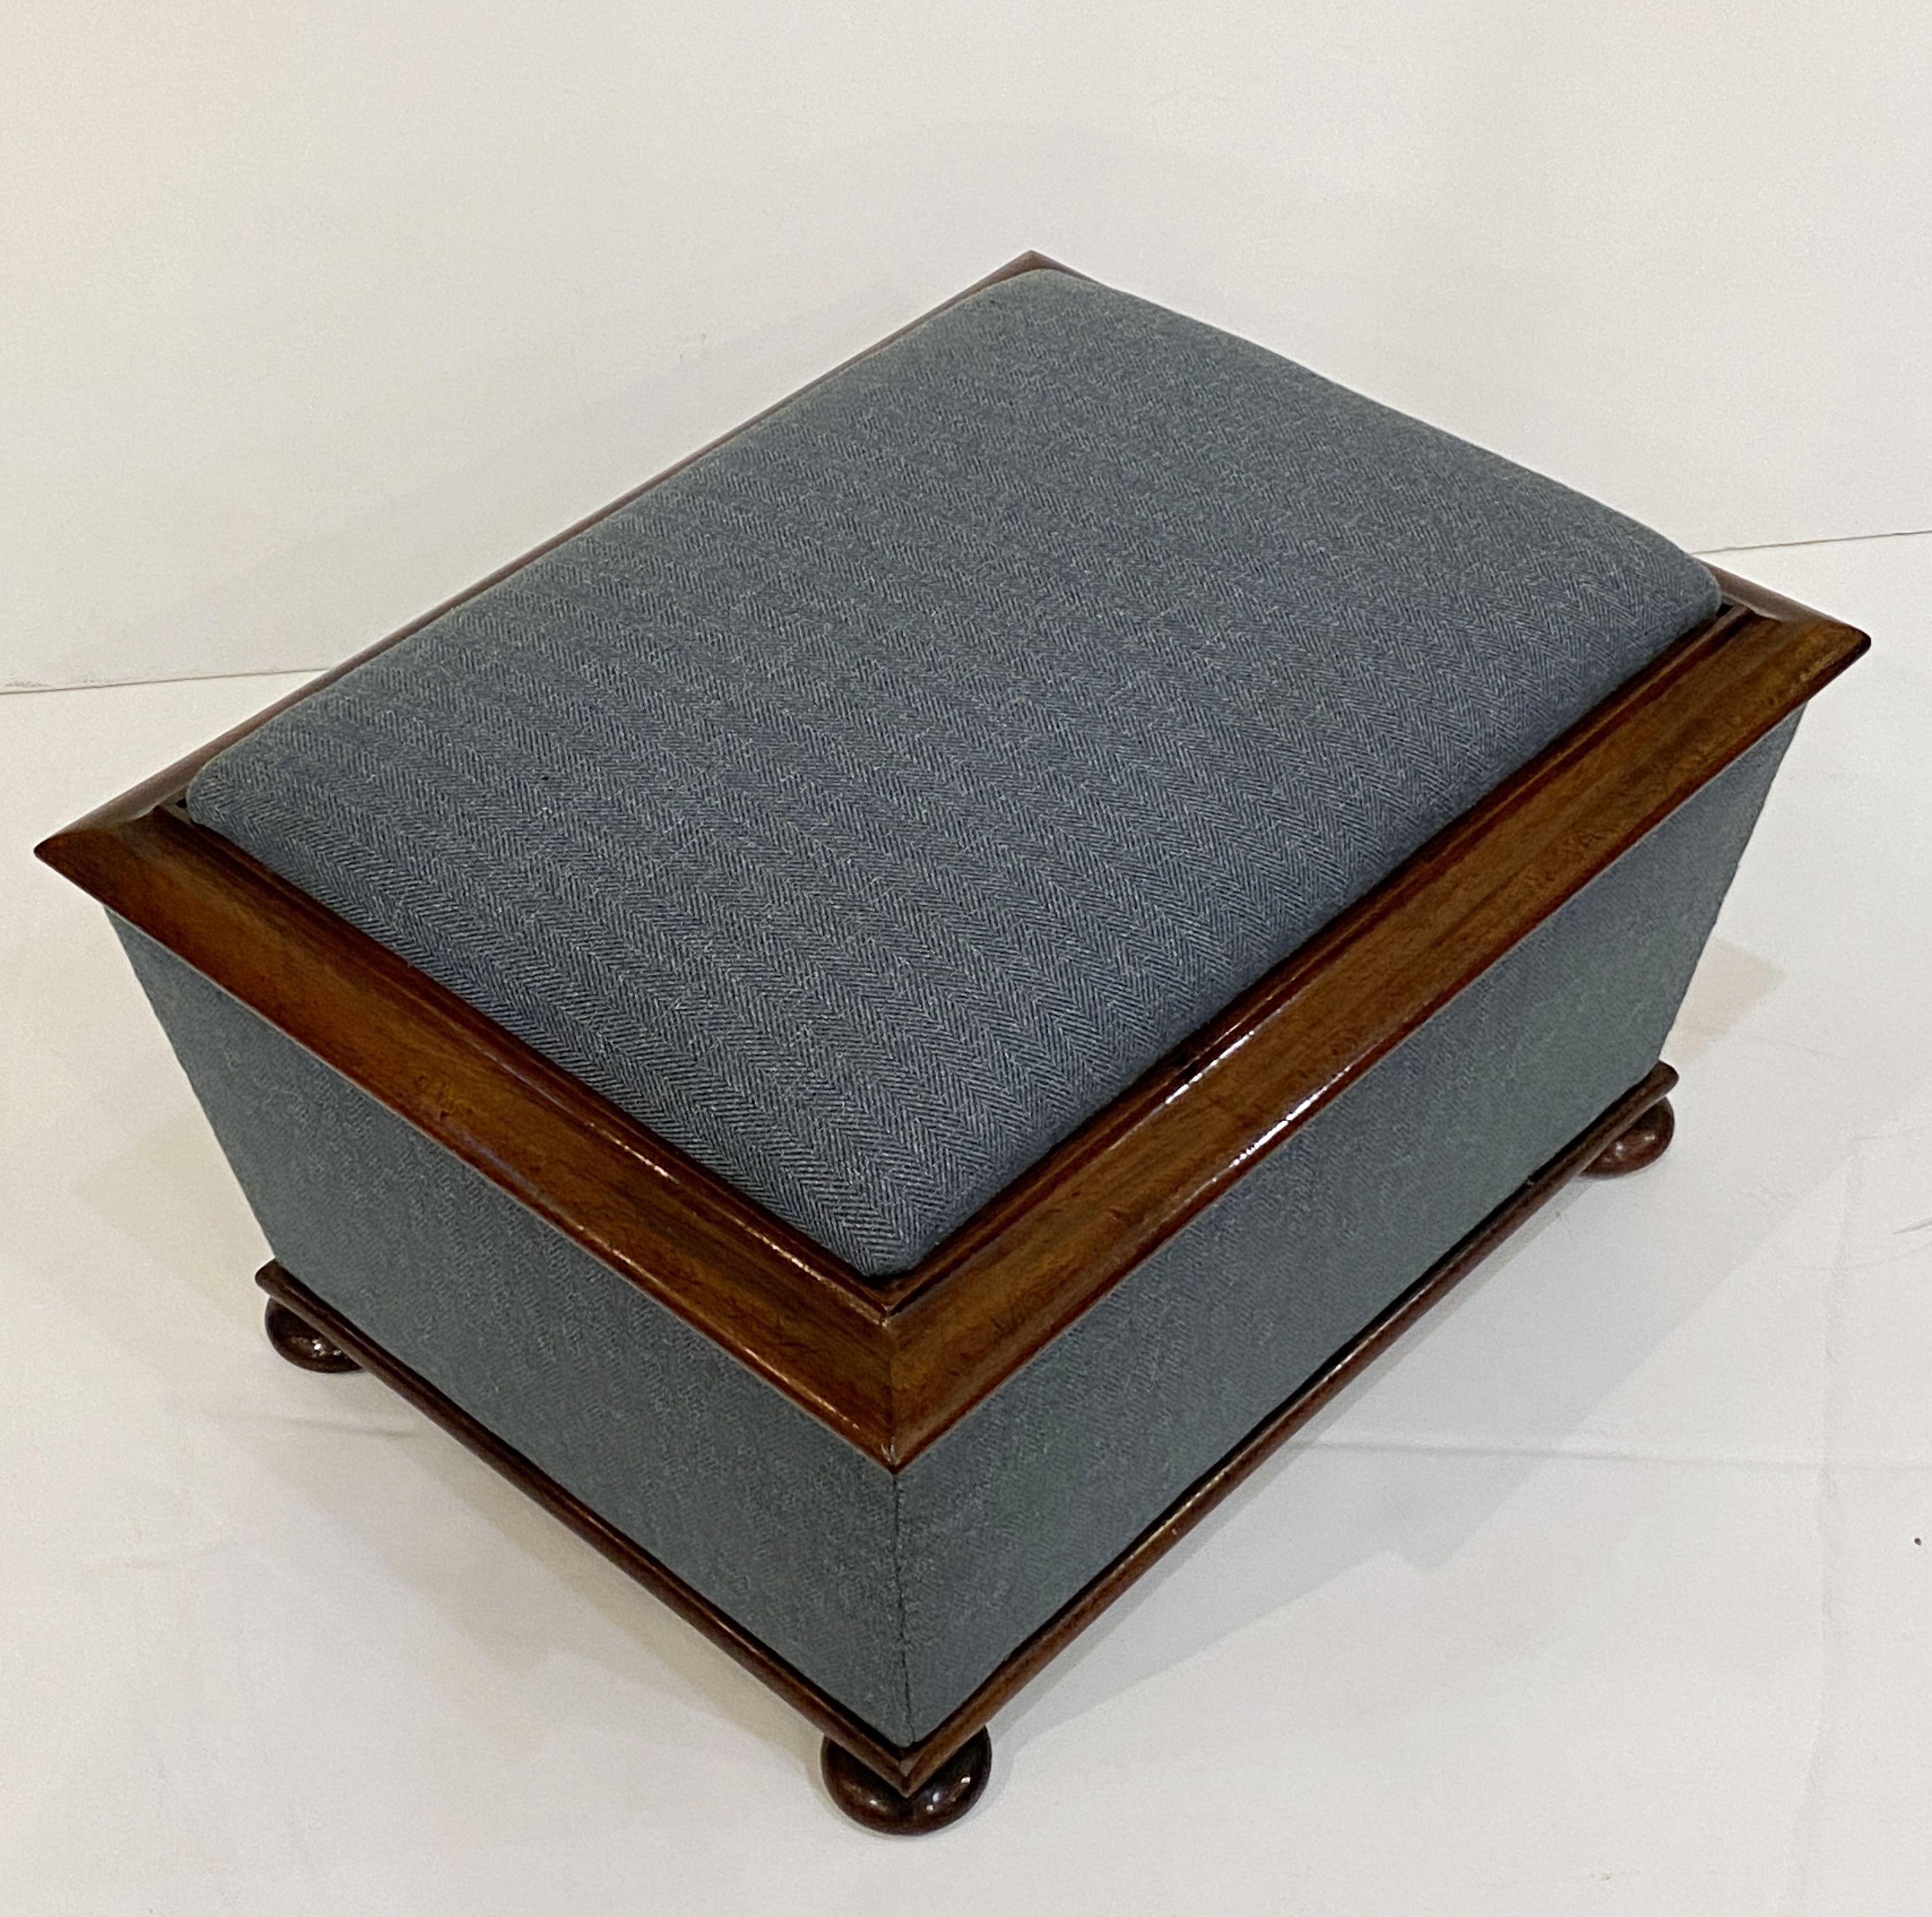 19th Century English Upholstered Trunk or Pouffe Ottoman Seat